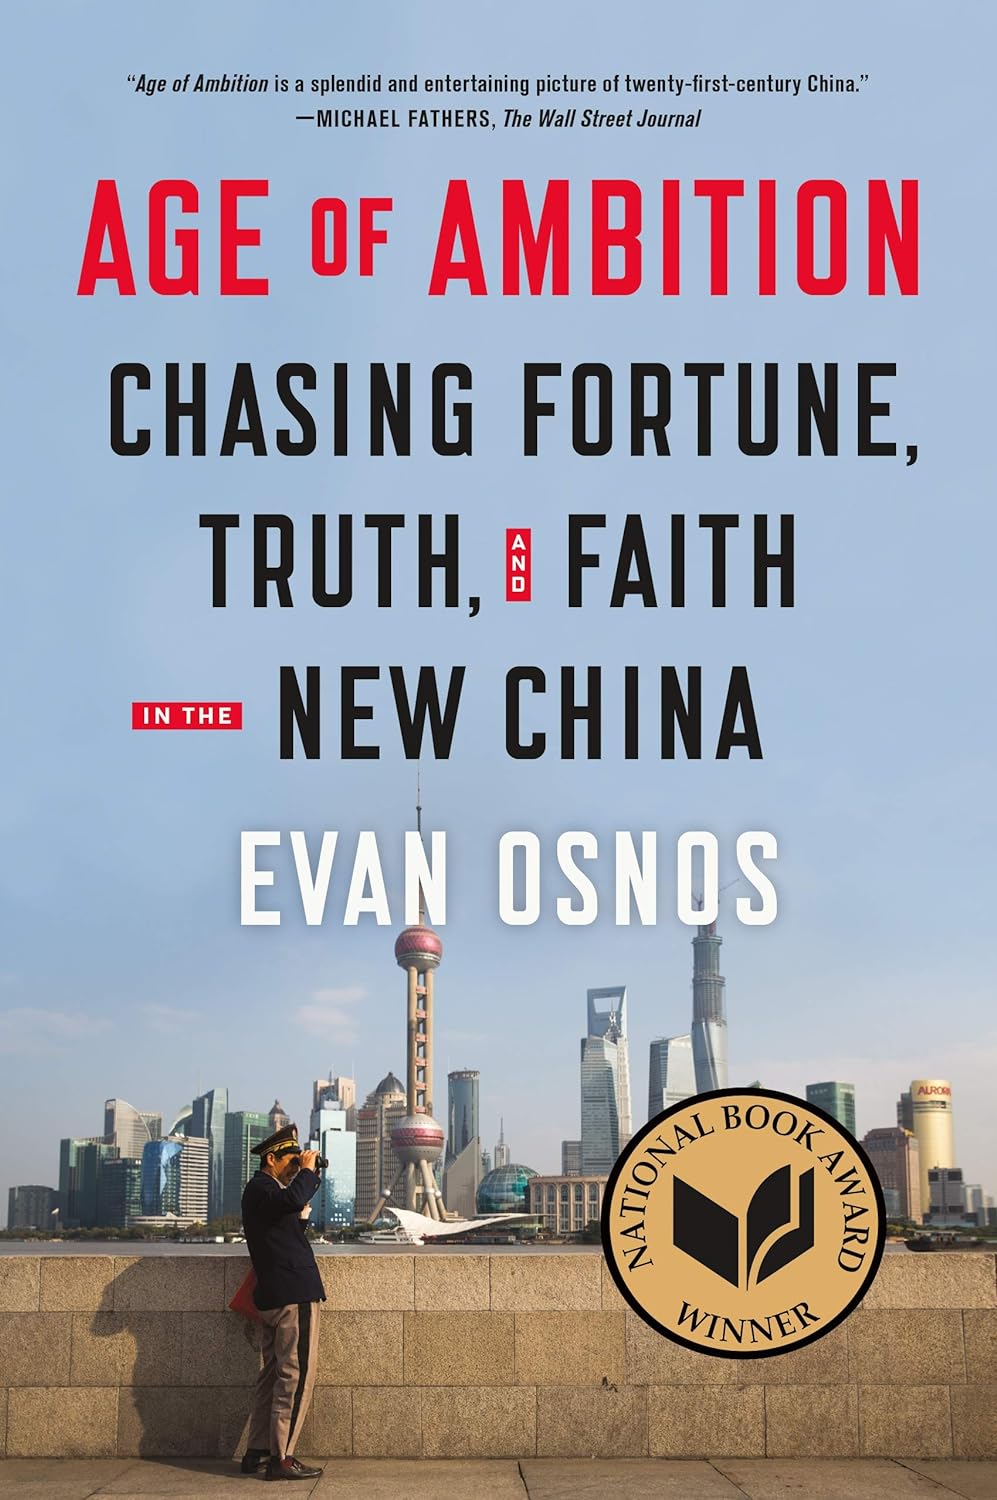 Age of Ambition Chasing Fortune, Truth, and Faith in the New China by Evan Osnos